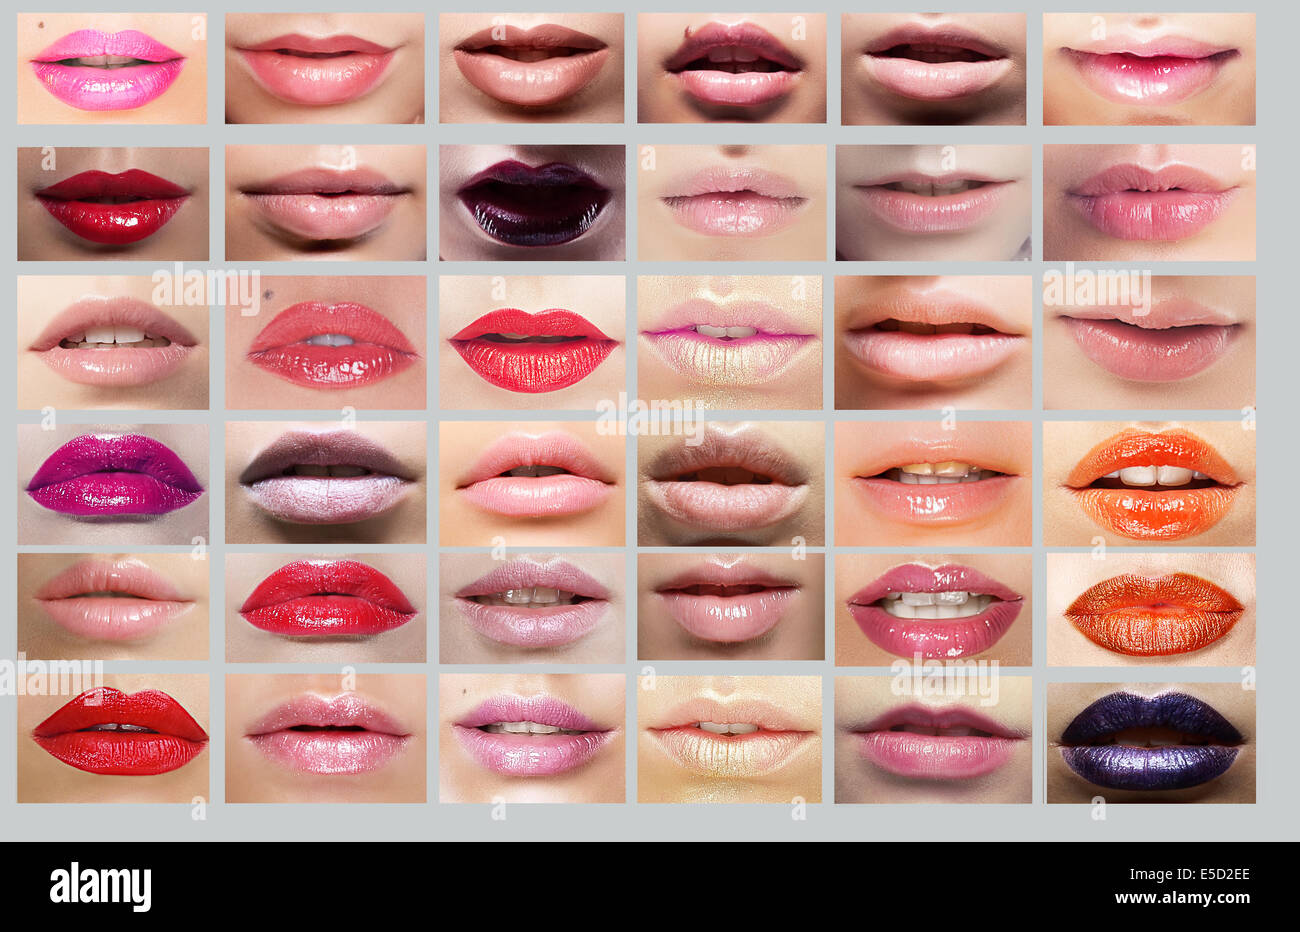 Lipstick. Great Variety of Women's Lips. Set of Mouths Stock Photo